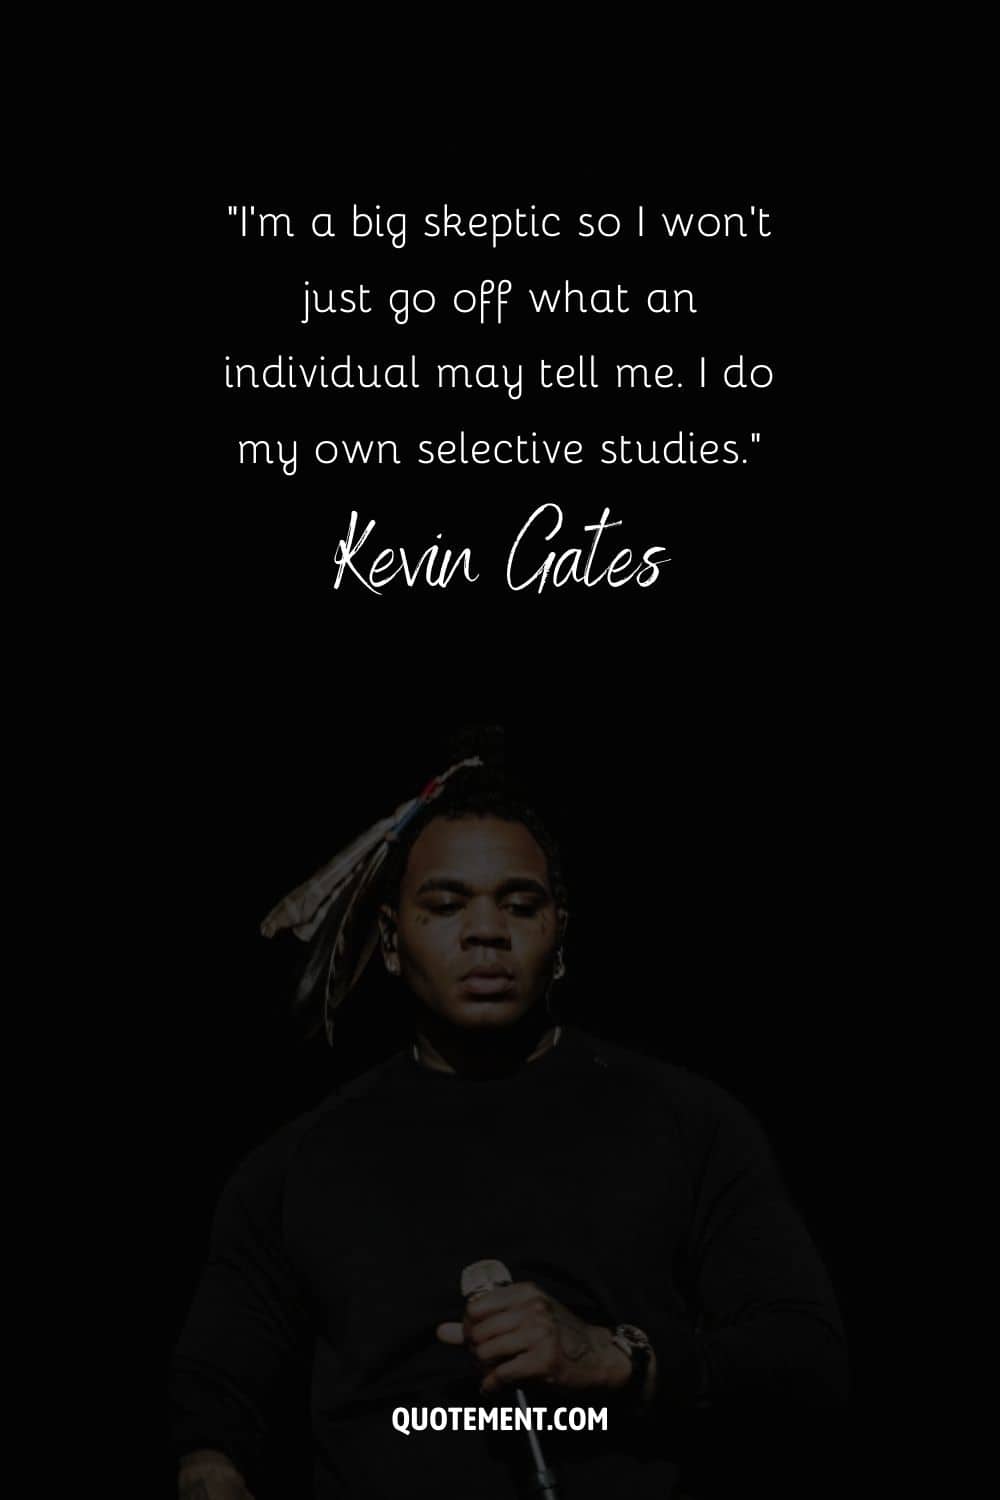 “I’m a big skeptic so I won’t just go off what an individual may tell me. I do my own selective studies.” – Kevin Gates